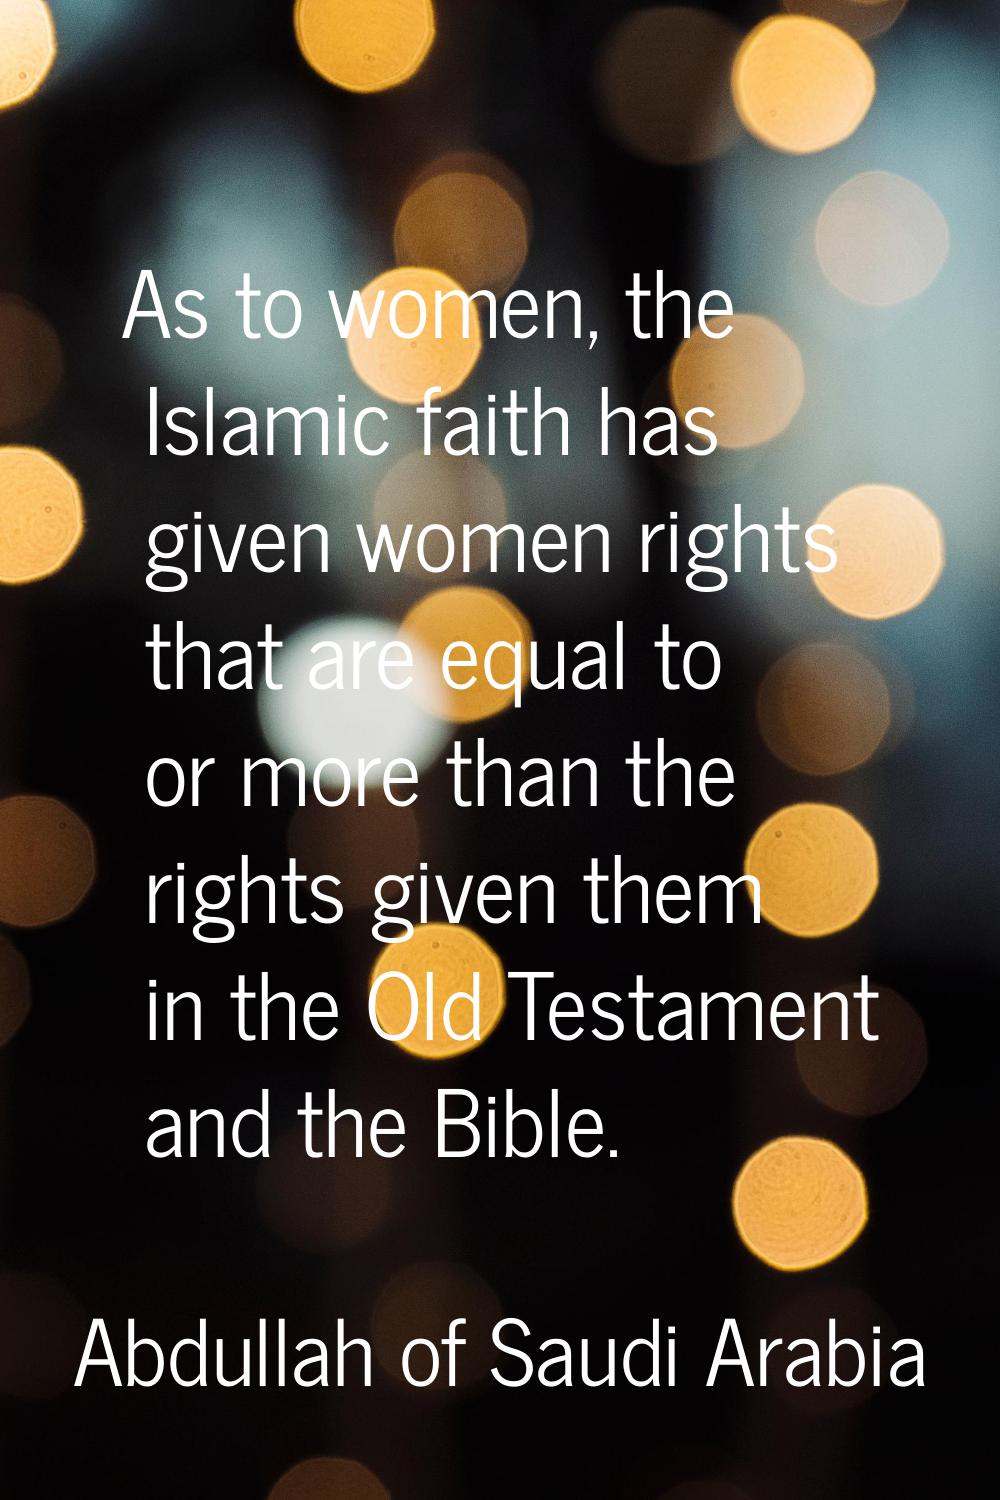 As to women, the Islamic faith has given women rights that are equal to or more than the rights giv